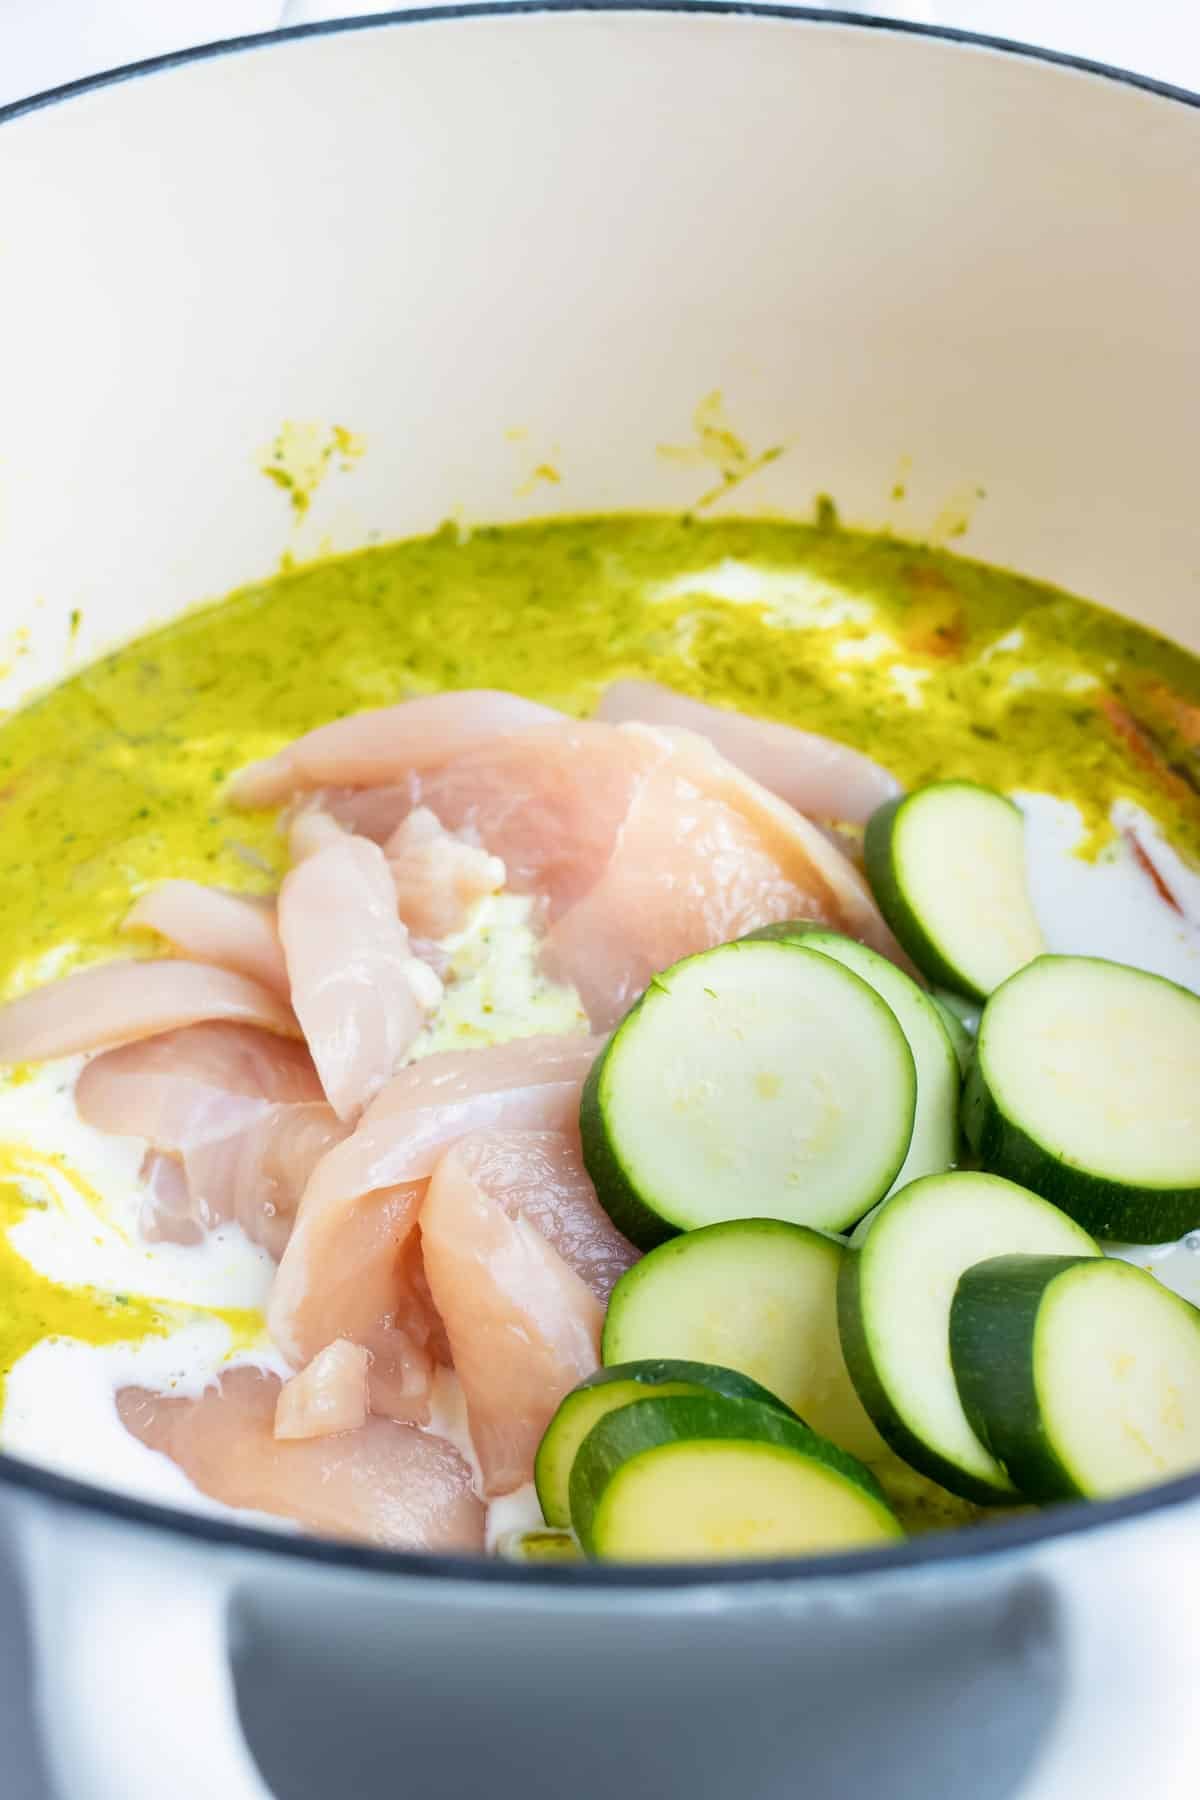 Sliced zucchini and chicken are added to this fresh Green chicken curry recipe.